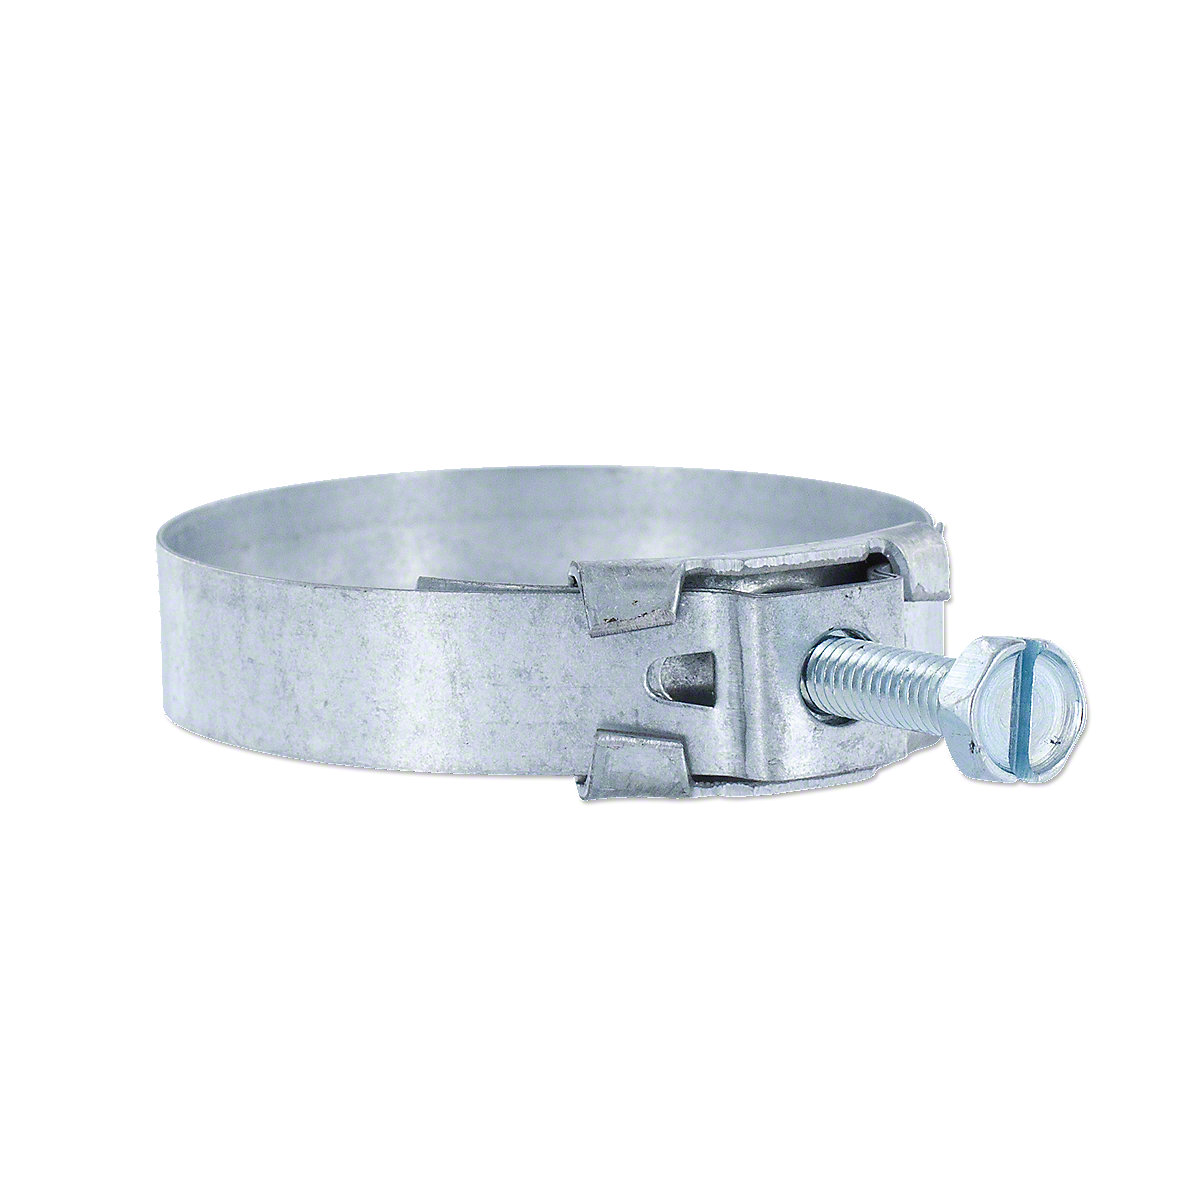 This is an original style hose clamp. Make sure that the Outside diameter of your hose measures between 1.687 and 1.780.